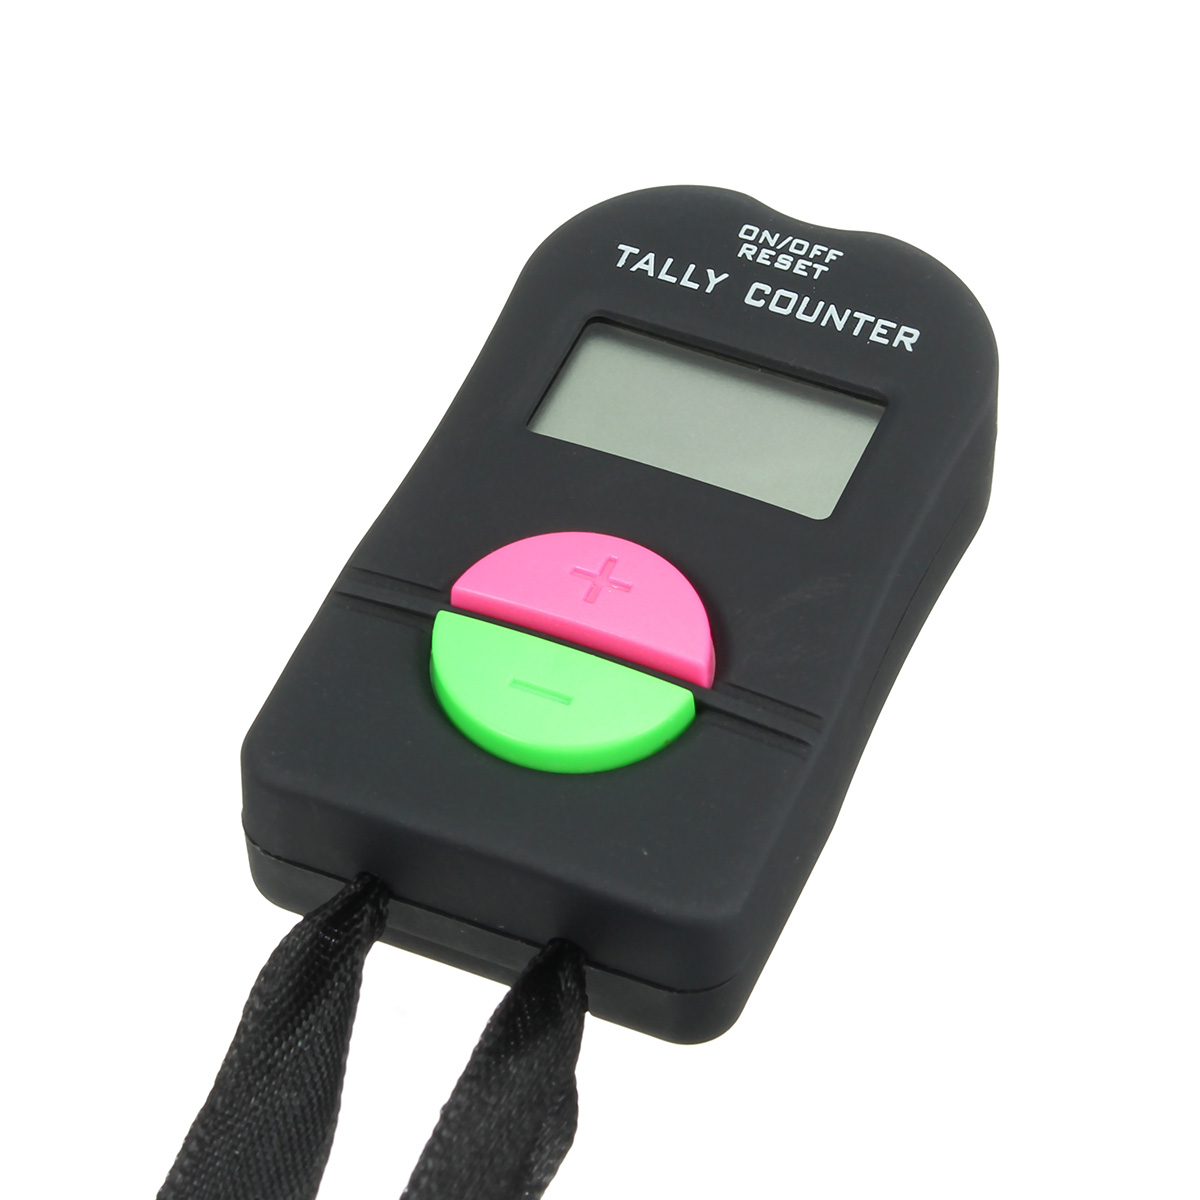 Digital-Electronic-Hand-Tally-Head-Counter-Clicker-For-Bouncer-Crowd-Sport-Golf-1700047-2